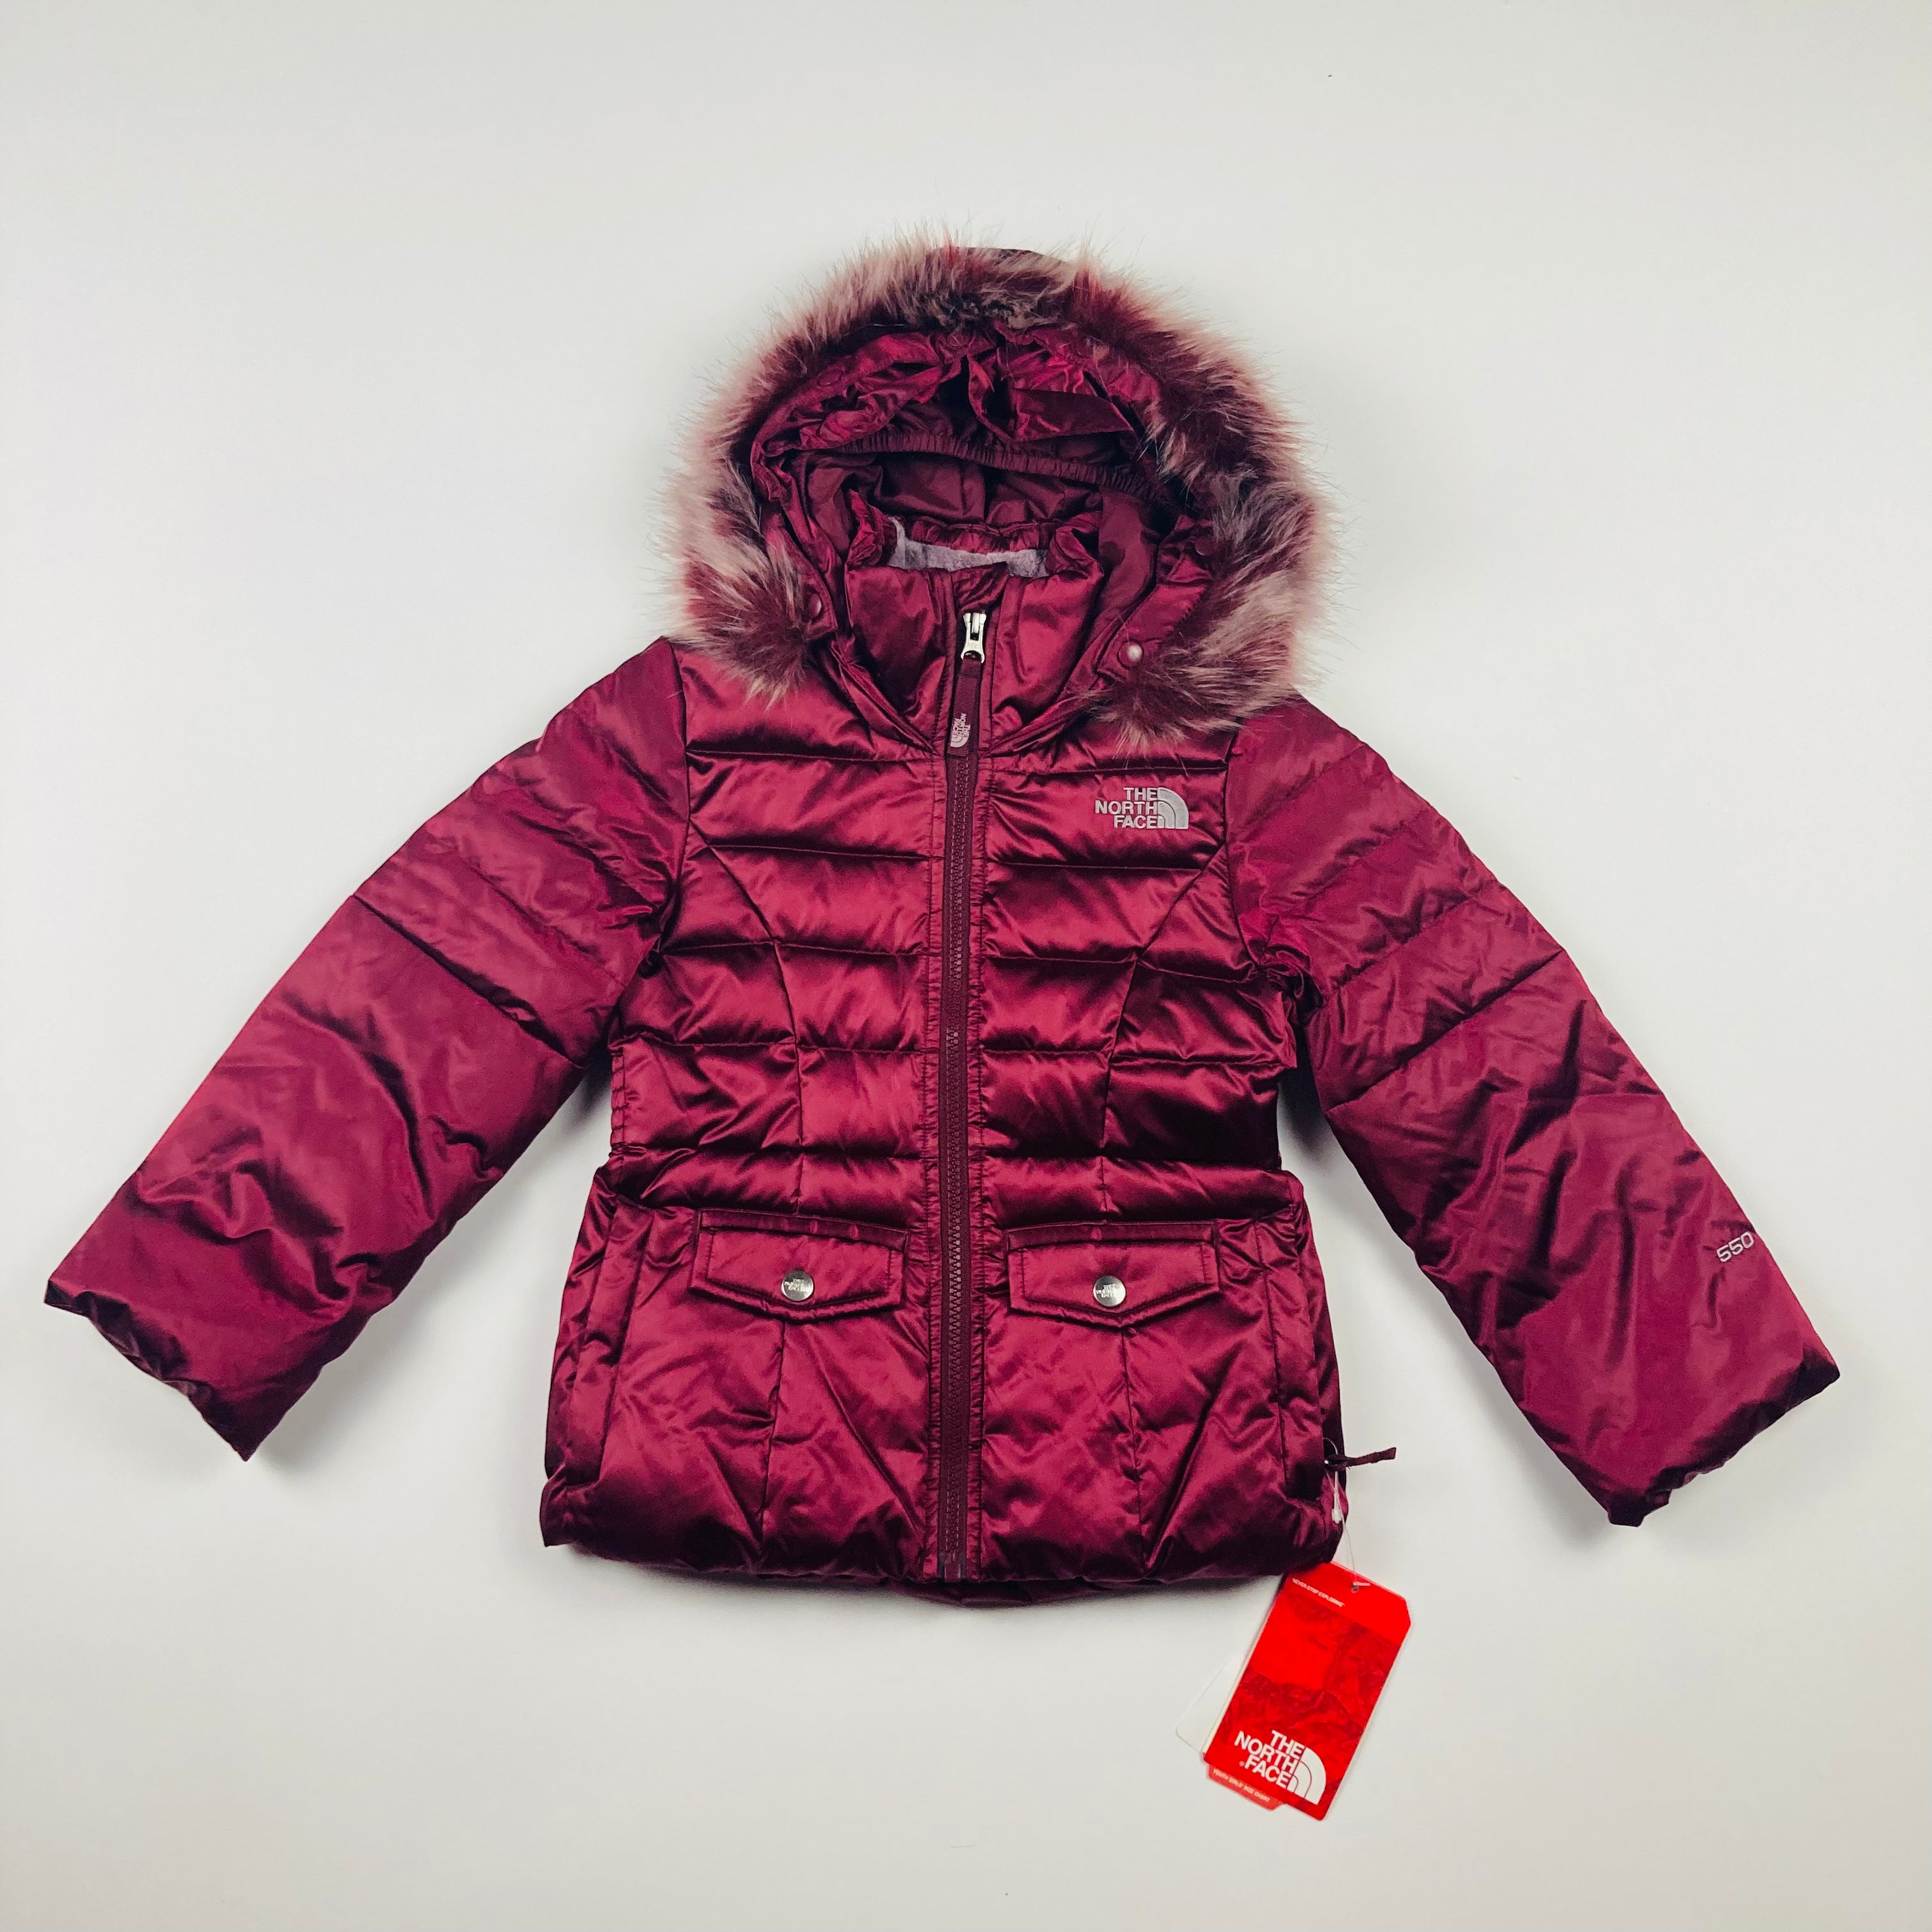 The North Face Gotham 2 Down Kids Jacket - Size 5 (Youth XXS)